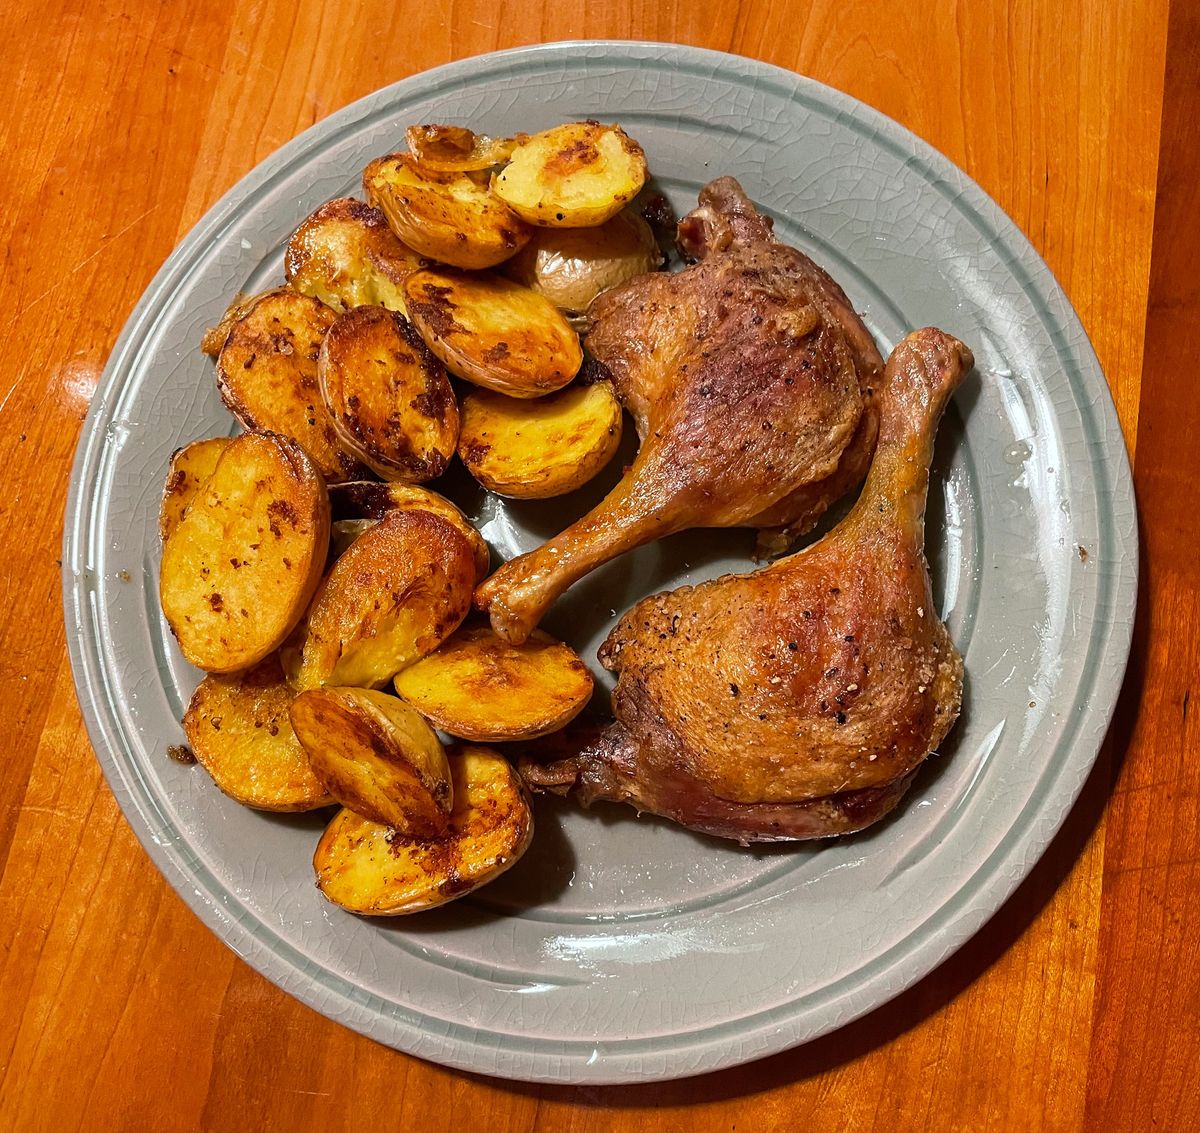 Recipe for roasted duck legs and potatoes